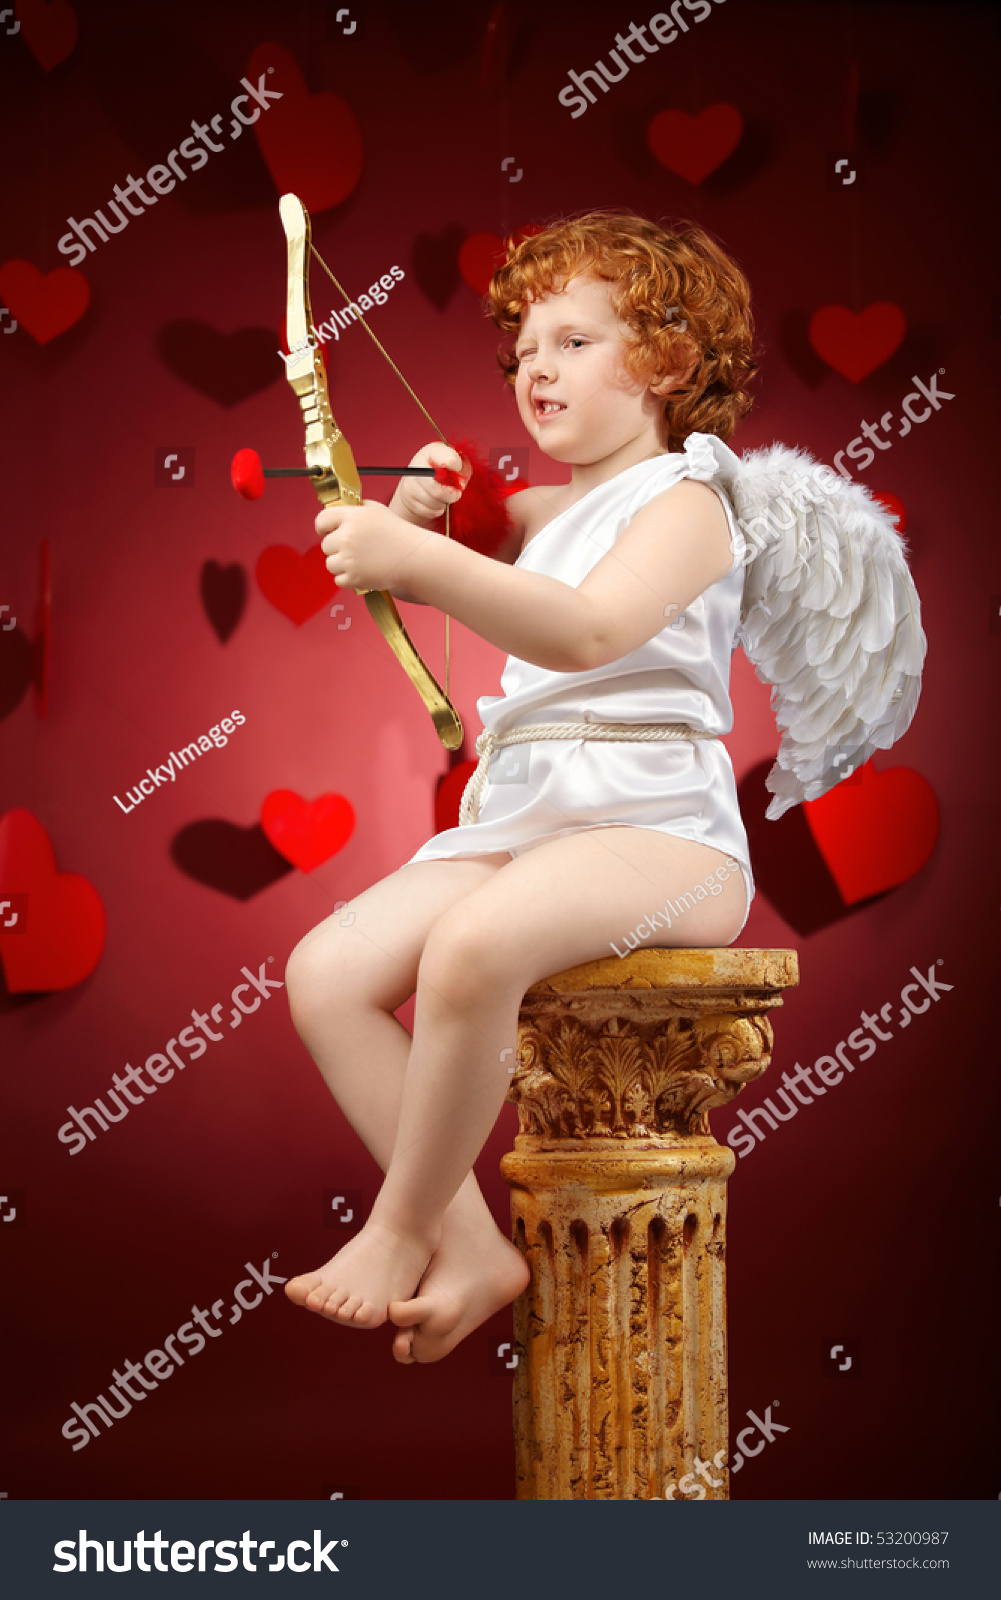 Small Pictures Of Cupid 119